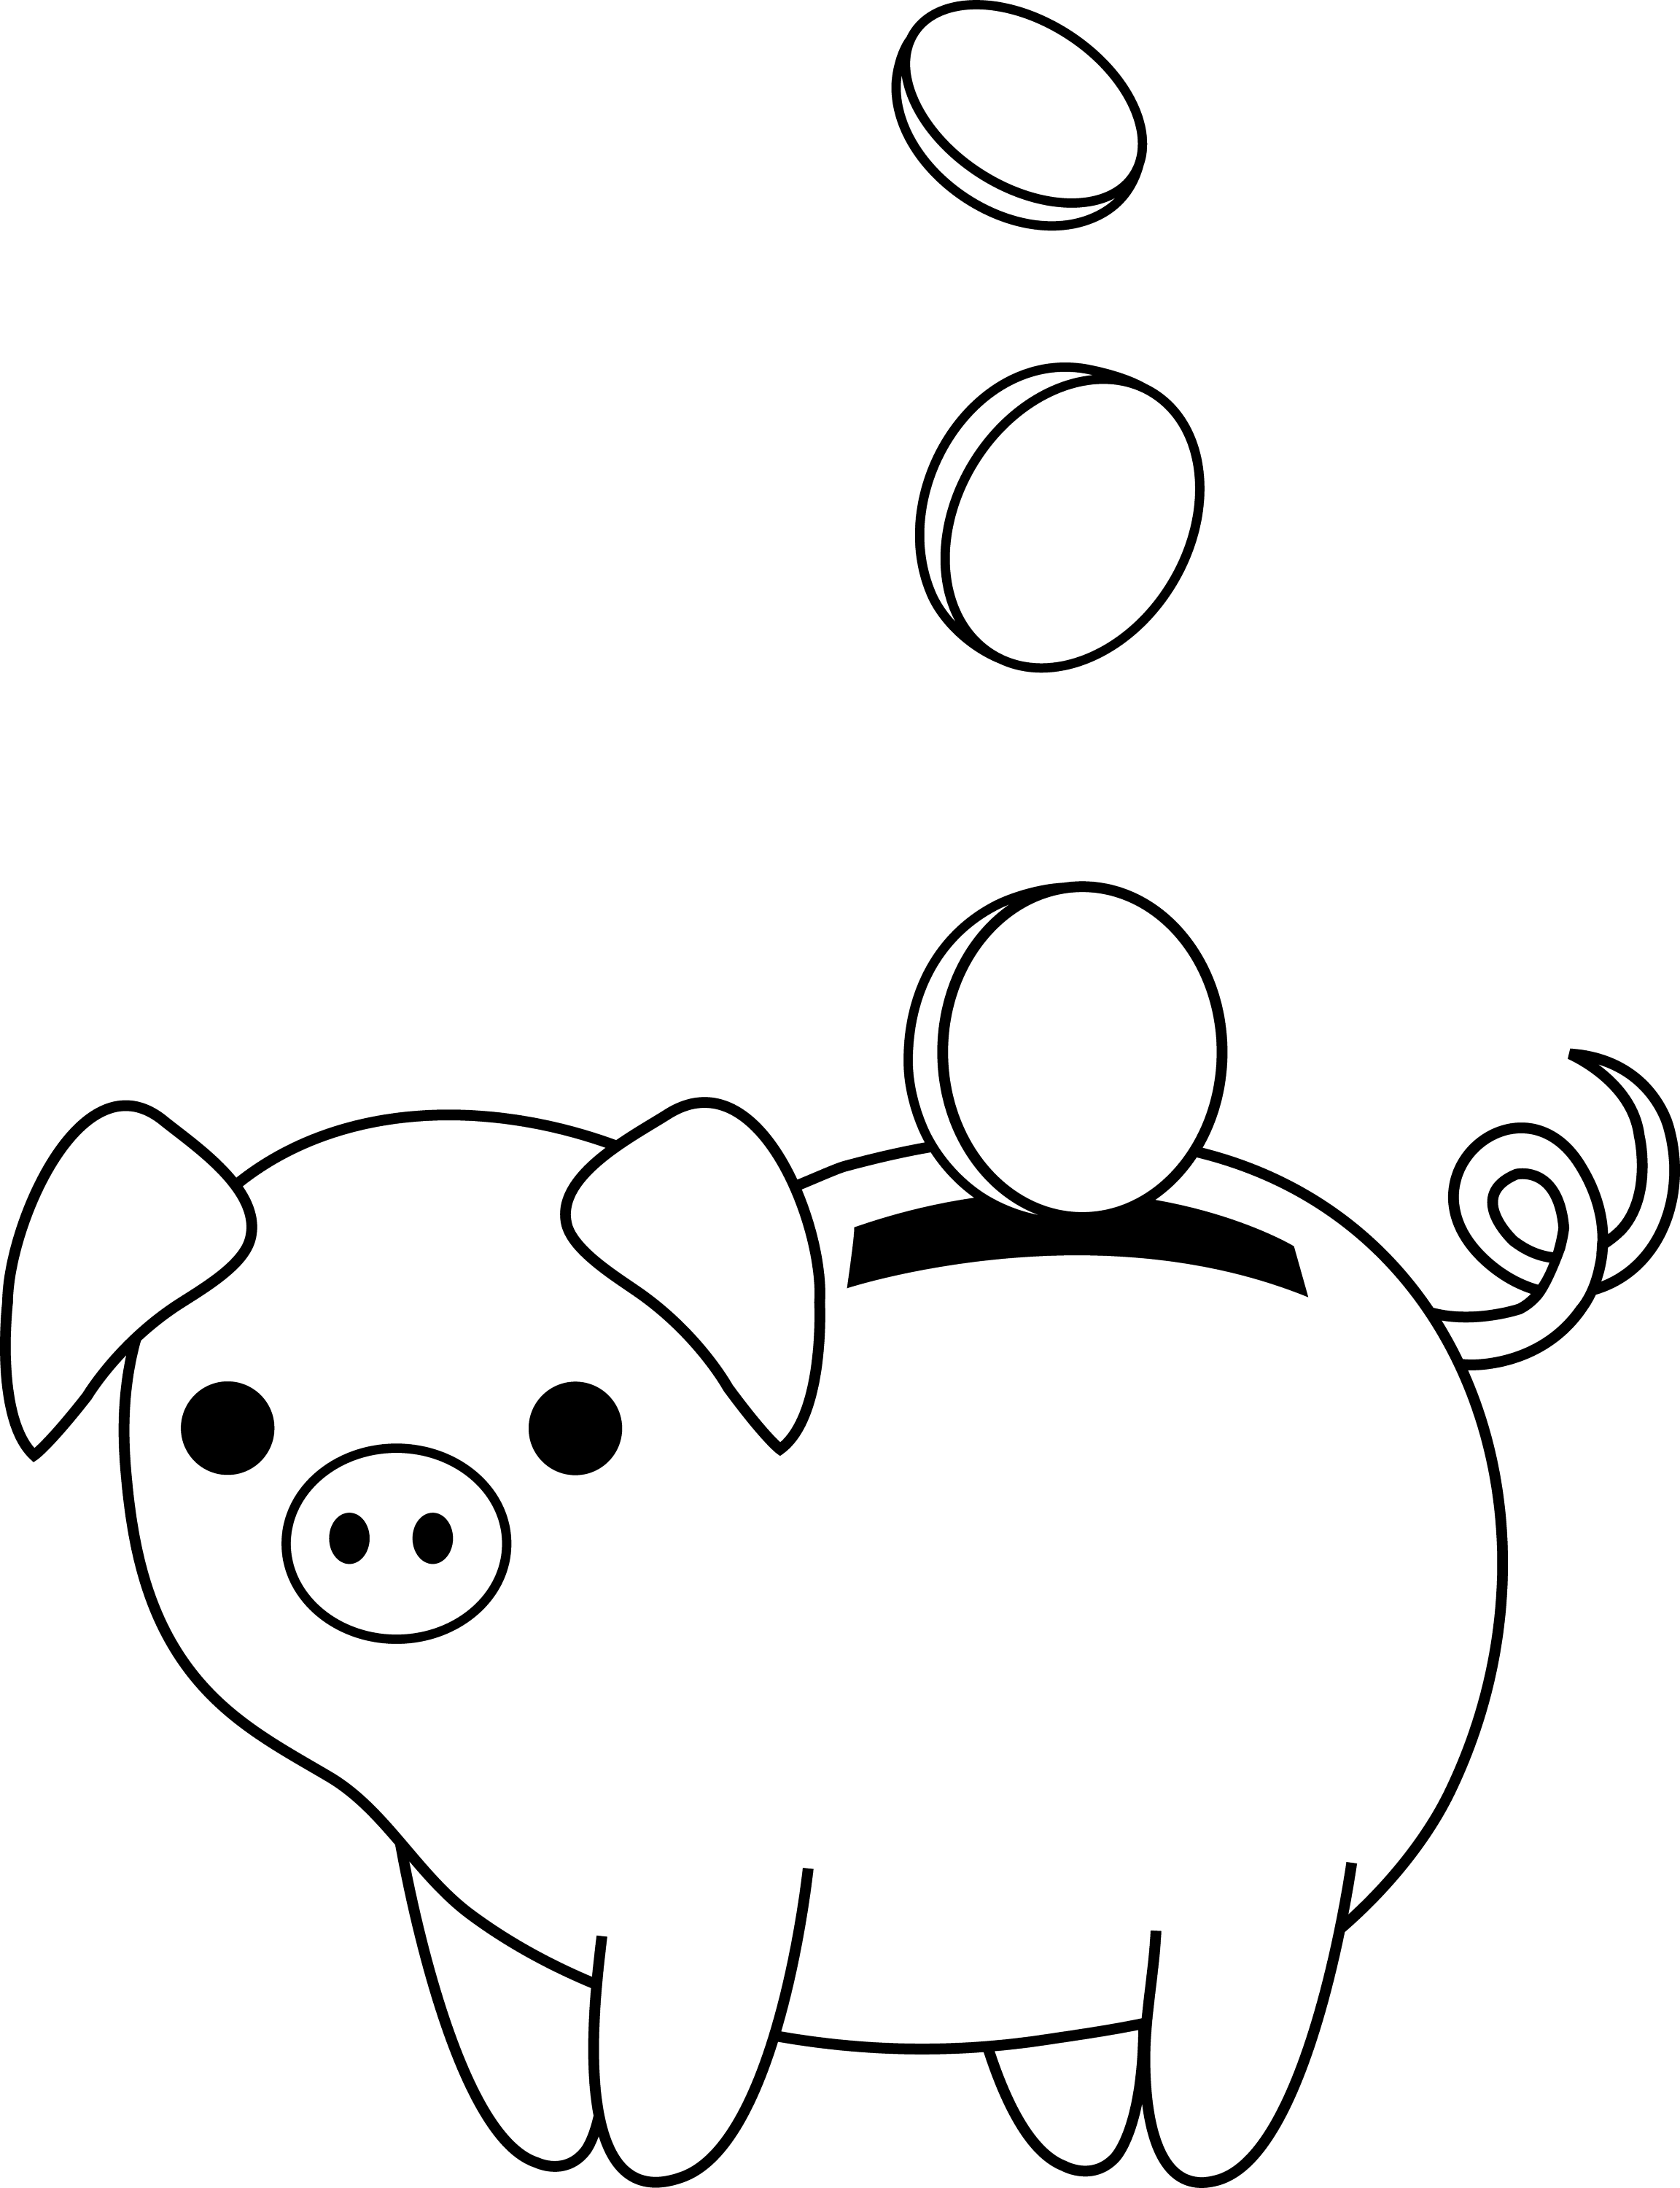 bank clipart black and white - photo #12